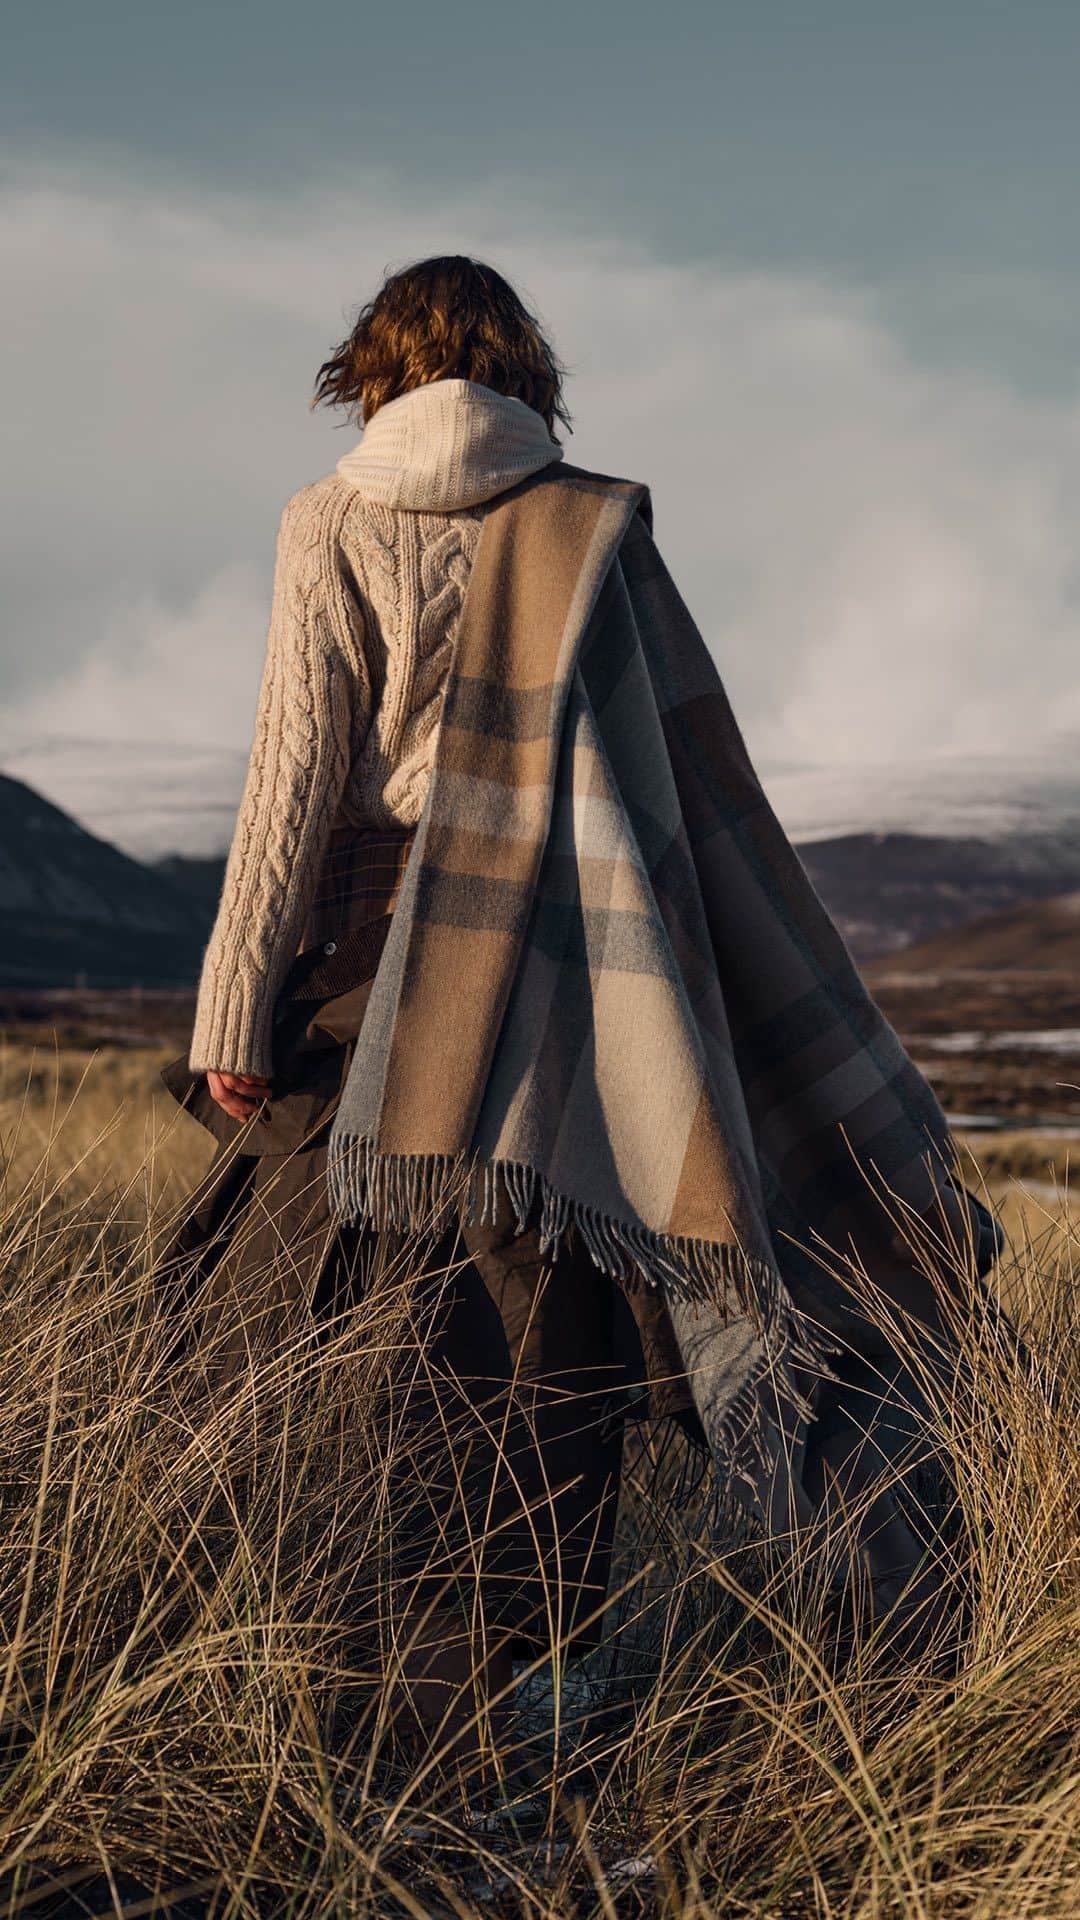 Johnstonsのインスタグラム：「Tradition Meets Modernity. Shot in the remote crofting township of Rackwick Bay on the island of Hoy, Orkney. This breathtaking bay is surrounded by imposing cliffs, heathery hills and the wild North Sea swell. ⁣ ⁣ Photograper: @barrycraske⁣ Videographer: @dbonnarfilms⁣ Stylist: @pruewhitestylist⁣ MUA: @curquhartmua⁣ Talent: @connornewall @mickestelle⁣ @stuart_harper @d8__studio⁣ ⁣ ⁣ ⁣ ⁣ ⁣ ⁣ ⁣ ⁣ #JohnstonsOfElgin #AW23 #AW23Collection #AutumnWinterCollection #NatureInspired #Orkney #RackwickBay #OldManOfHoy」